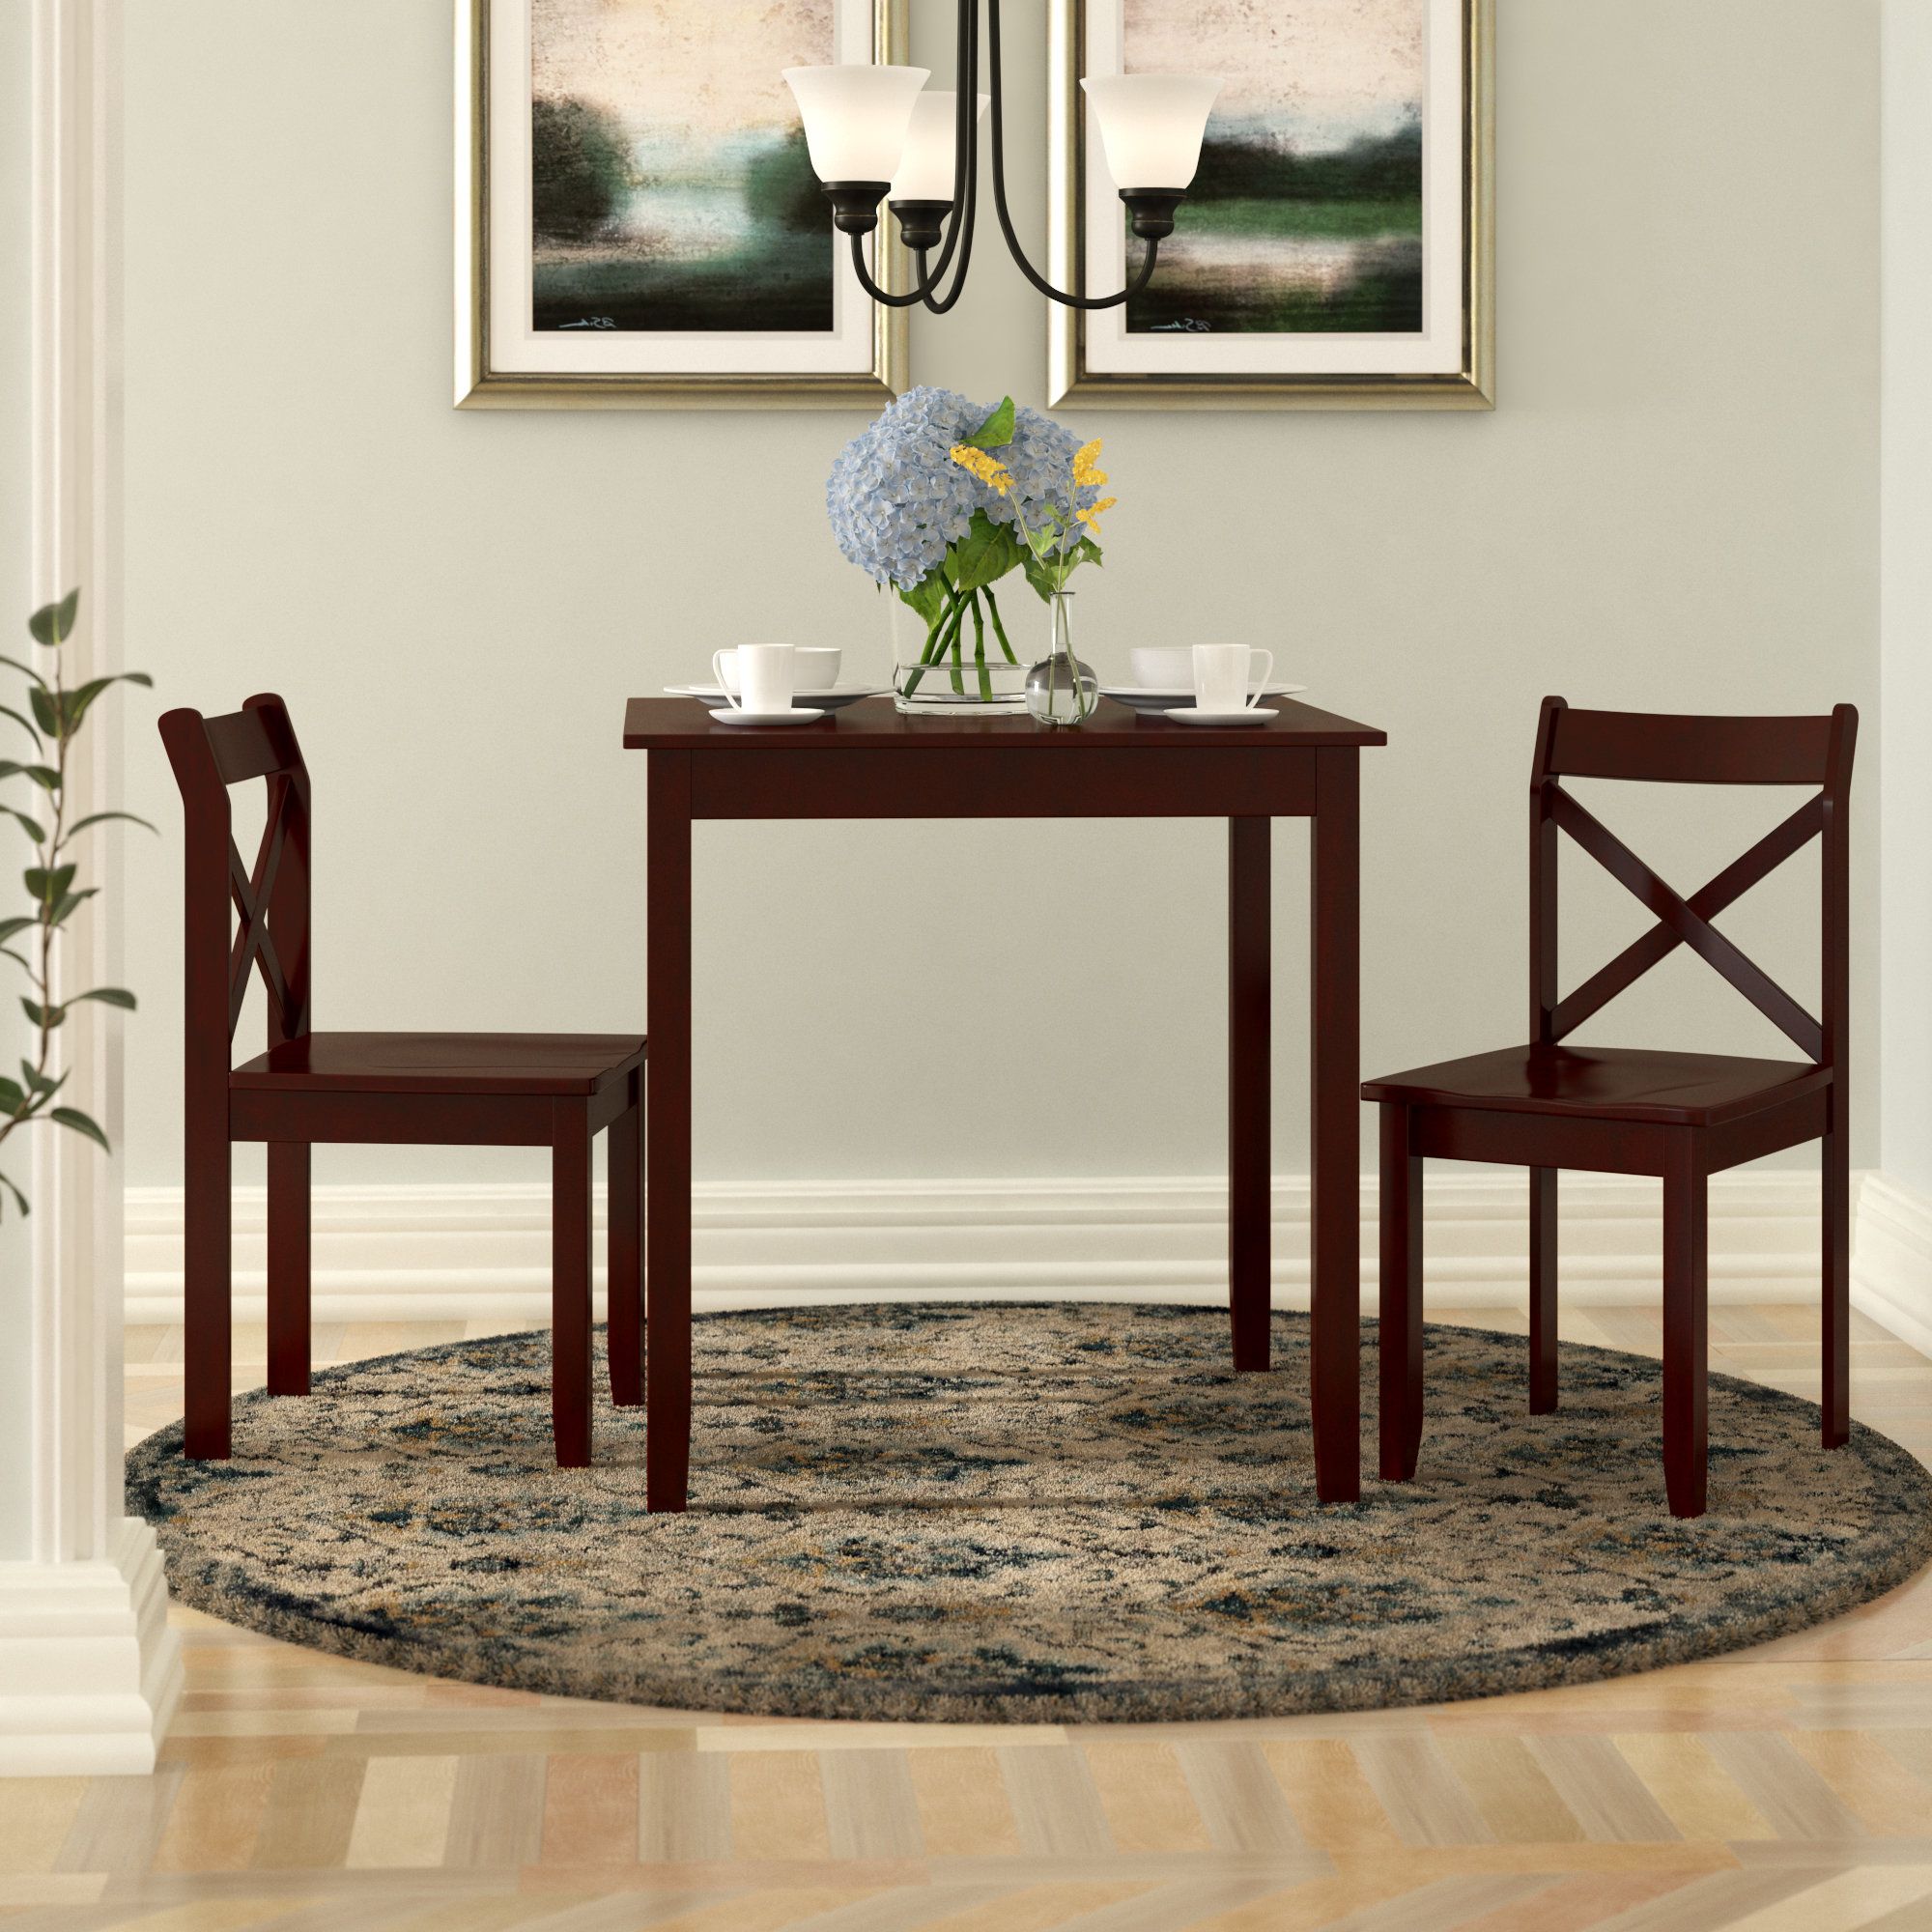 Falmer 3 Piece Solid Wood Dining Sets With Regard To Widely Used 3 Piece Kitchen & Dining Room Sets You'll Love In  (View 5 of 20)